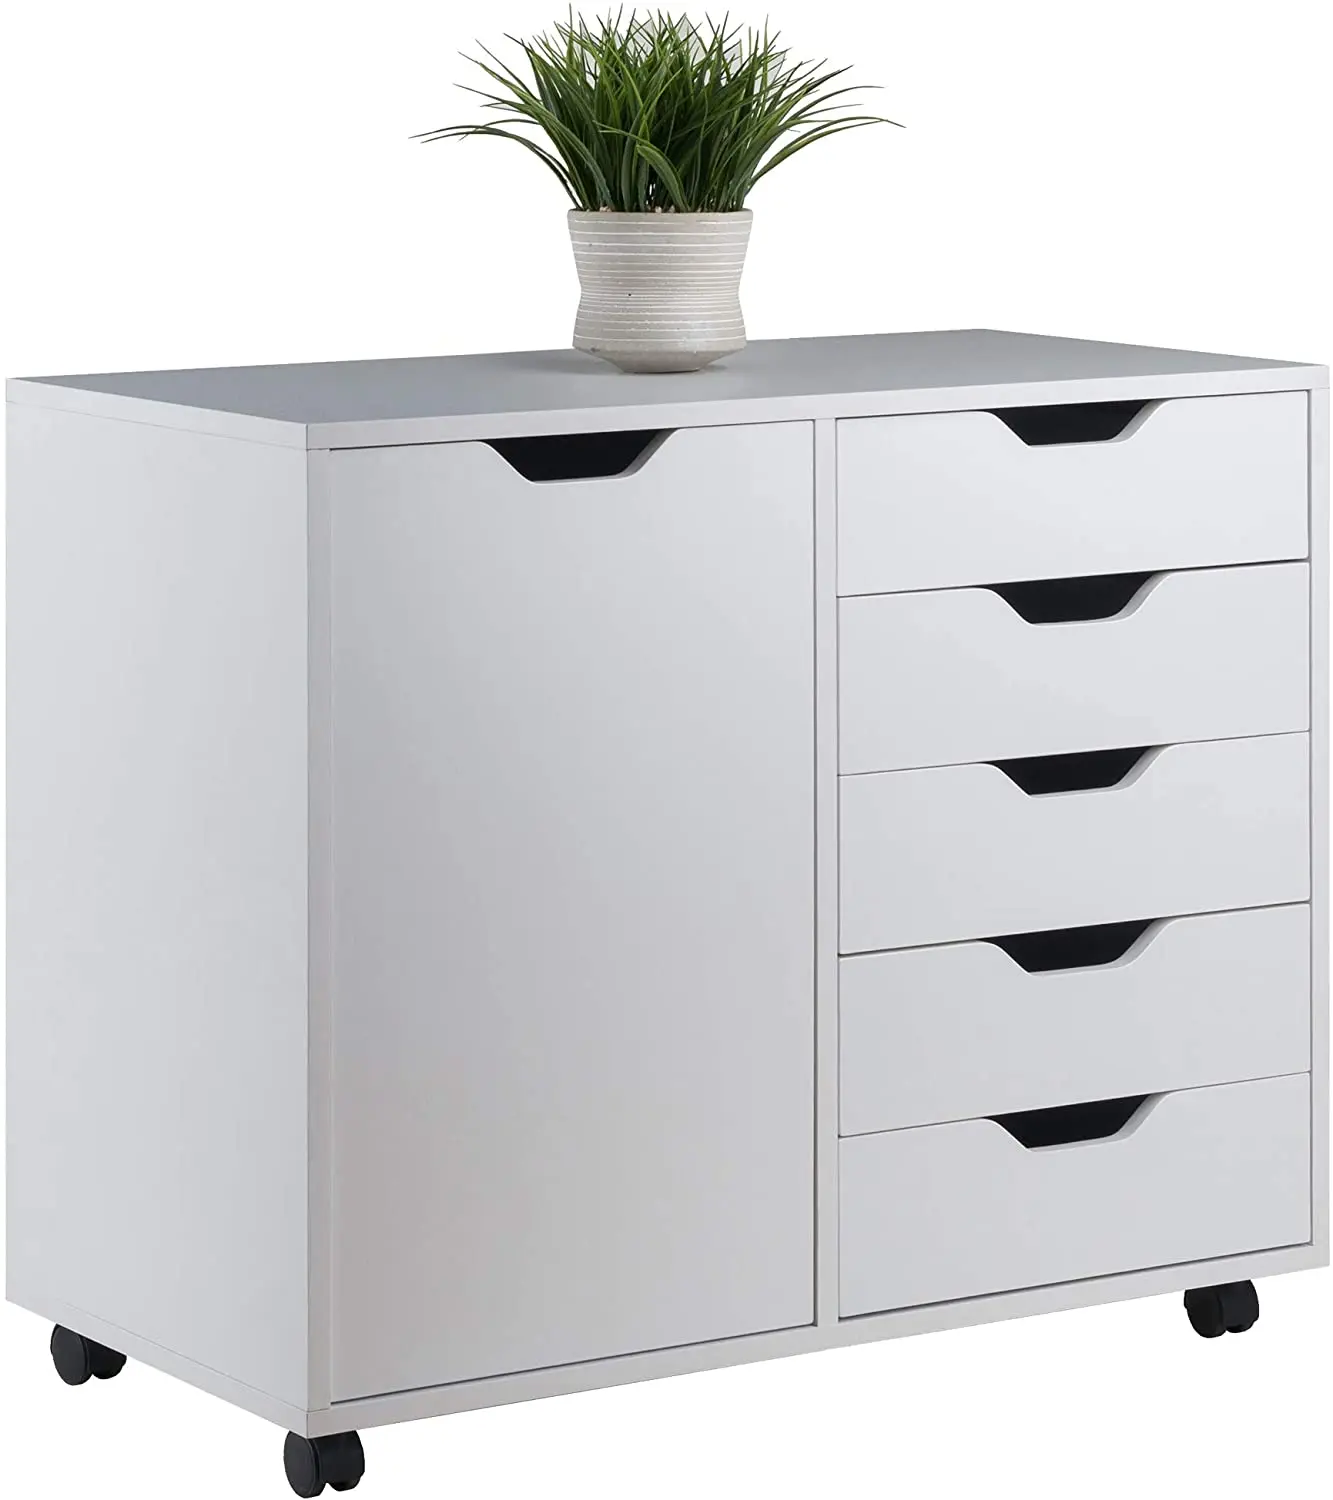 
Winsome Wood Halifax 5 Drawer Mobile Side Cabinet, Multiple Finishes 